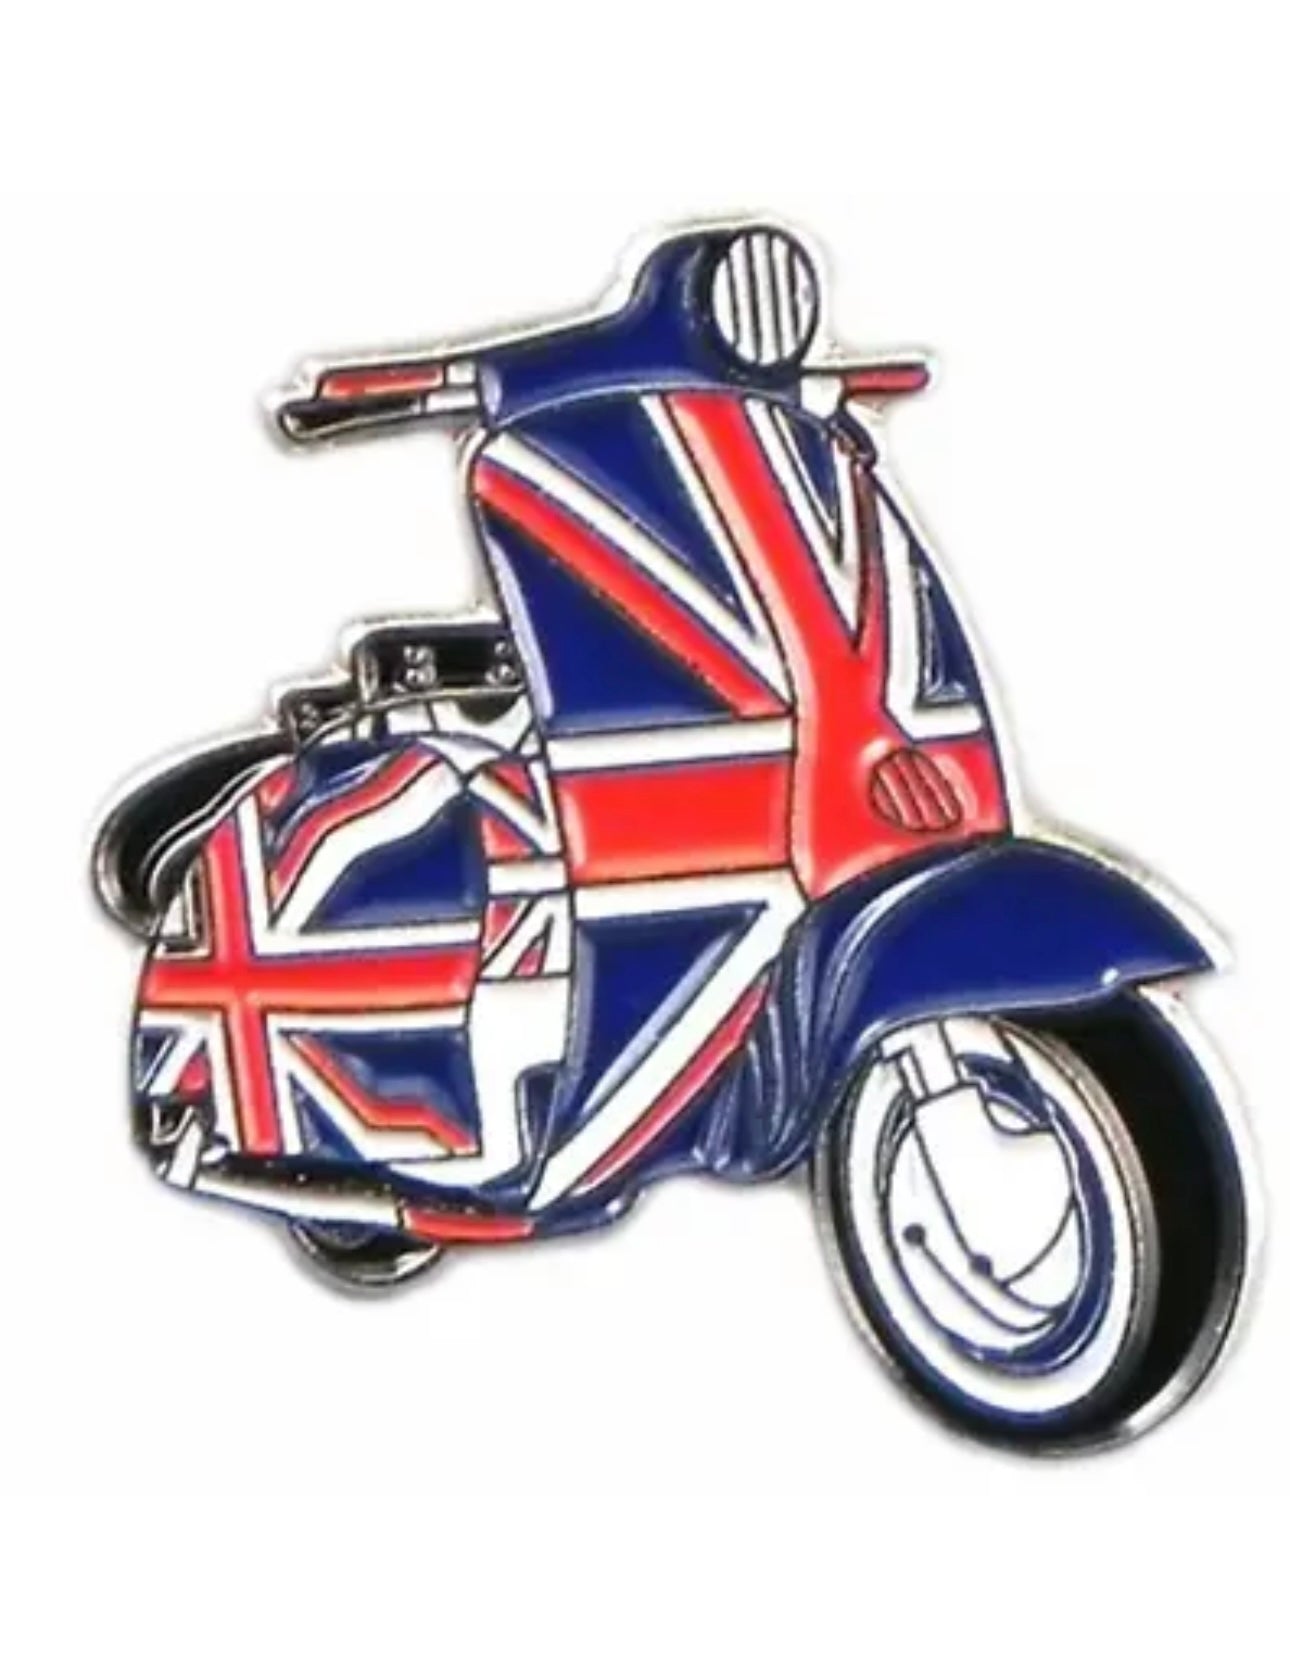 Union Jack Scooter Mod Pin Badge Red/White/Blue - B11-38